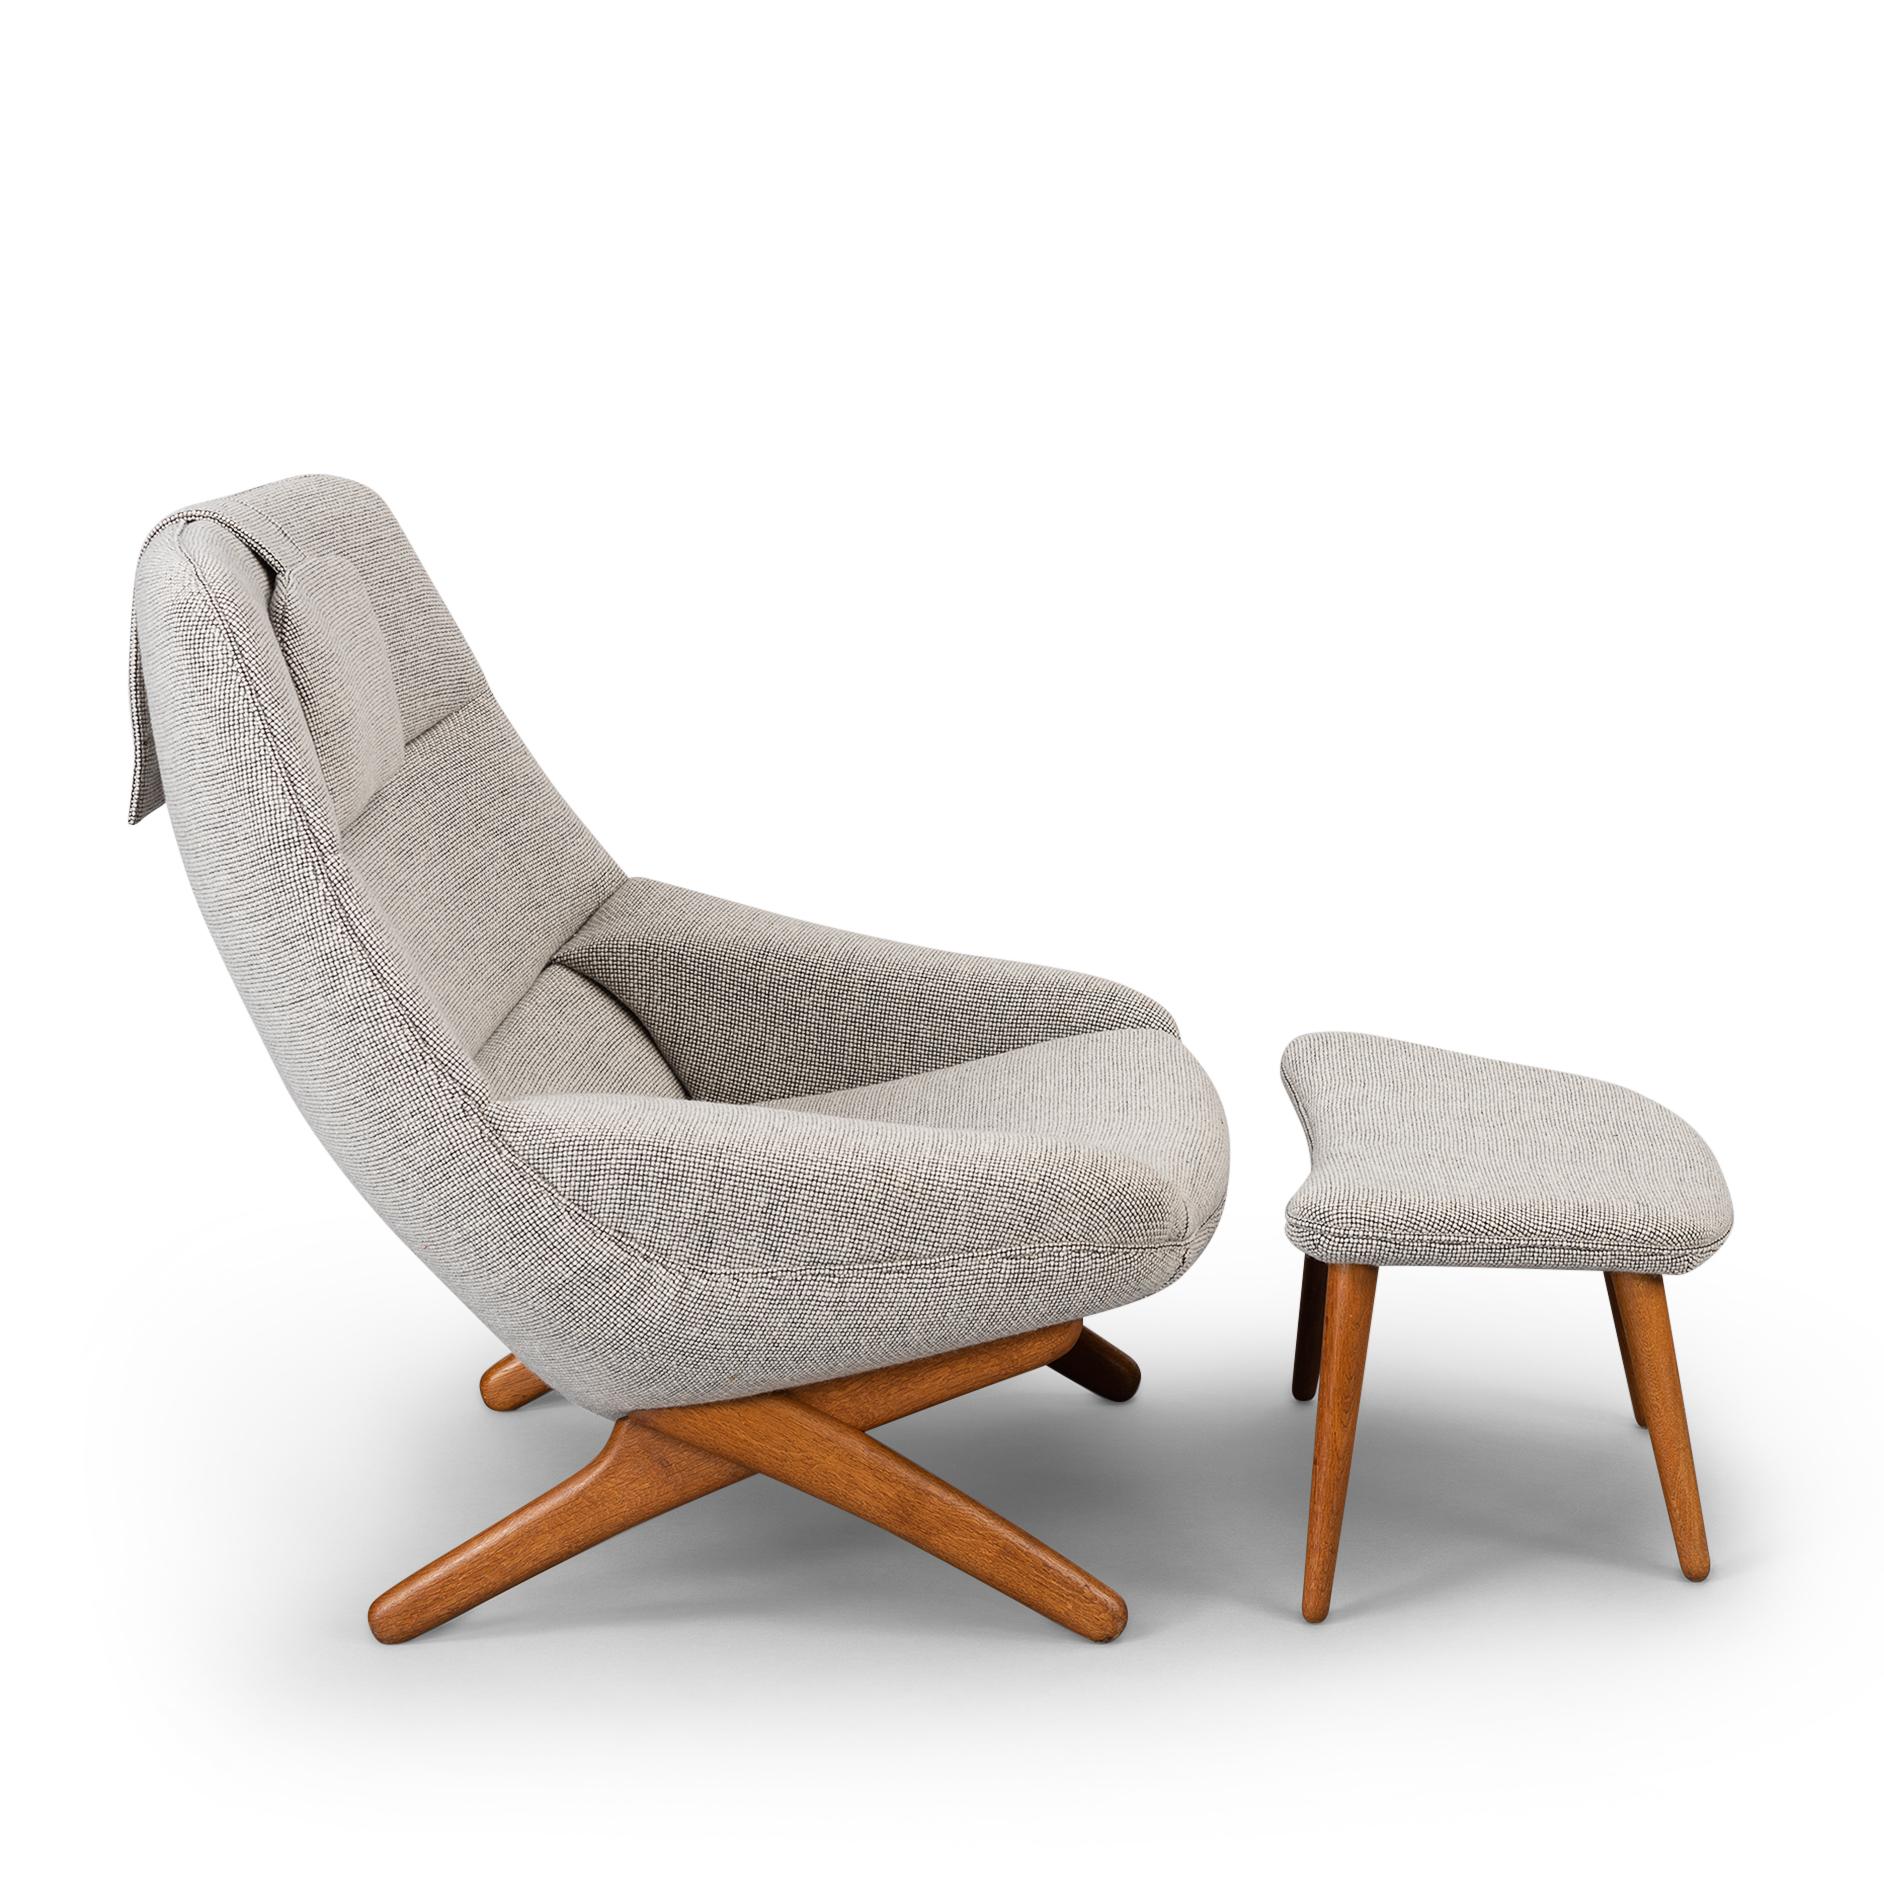 Clearly recognizable as a Illum Wikkelso design is this comfortable ML-91 easy chair. This chair was made mid sixties by the Michael Laursen factory. A fairly unconventional design with crossed solid teak legs that support the back what makes it